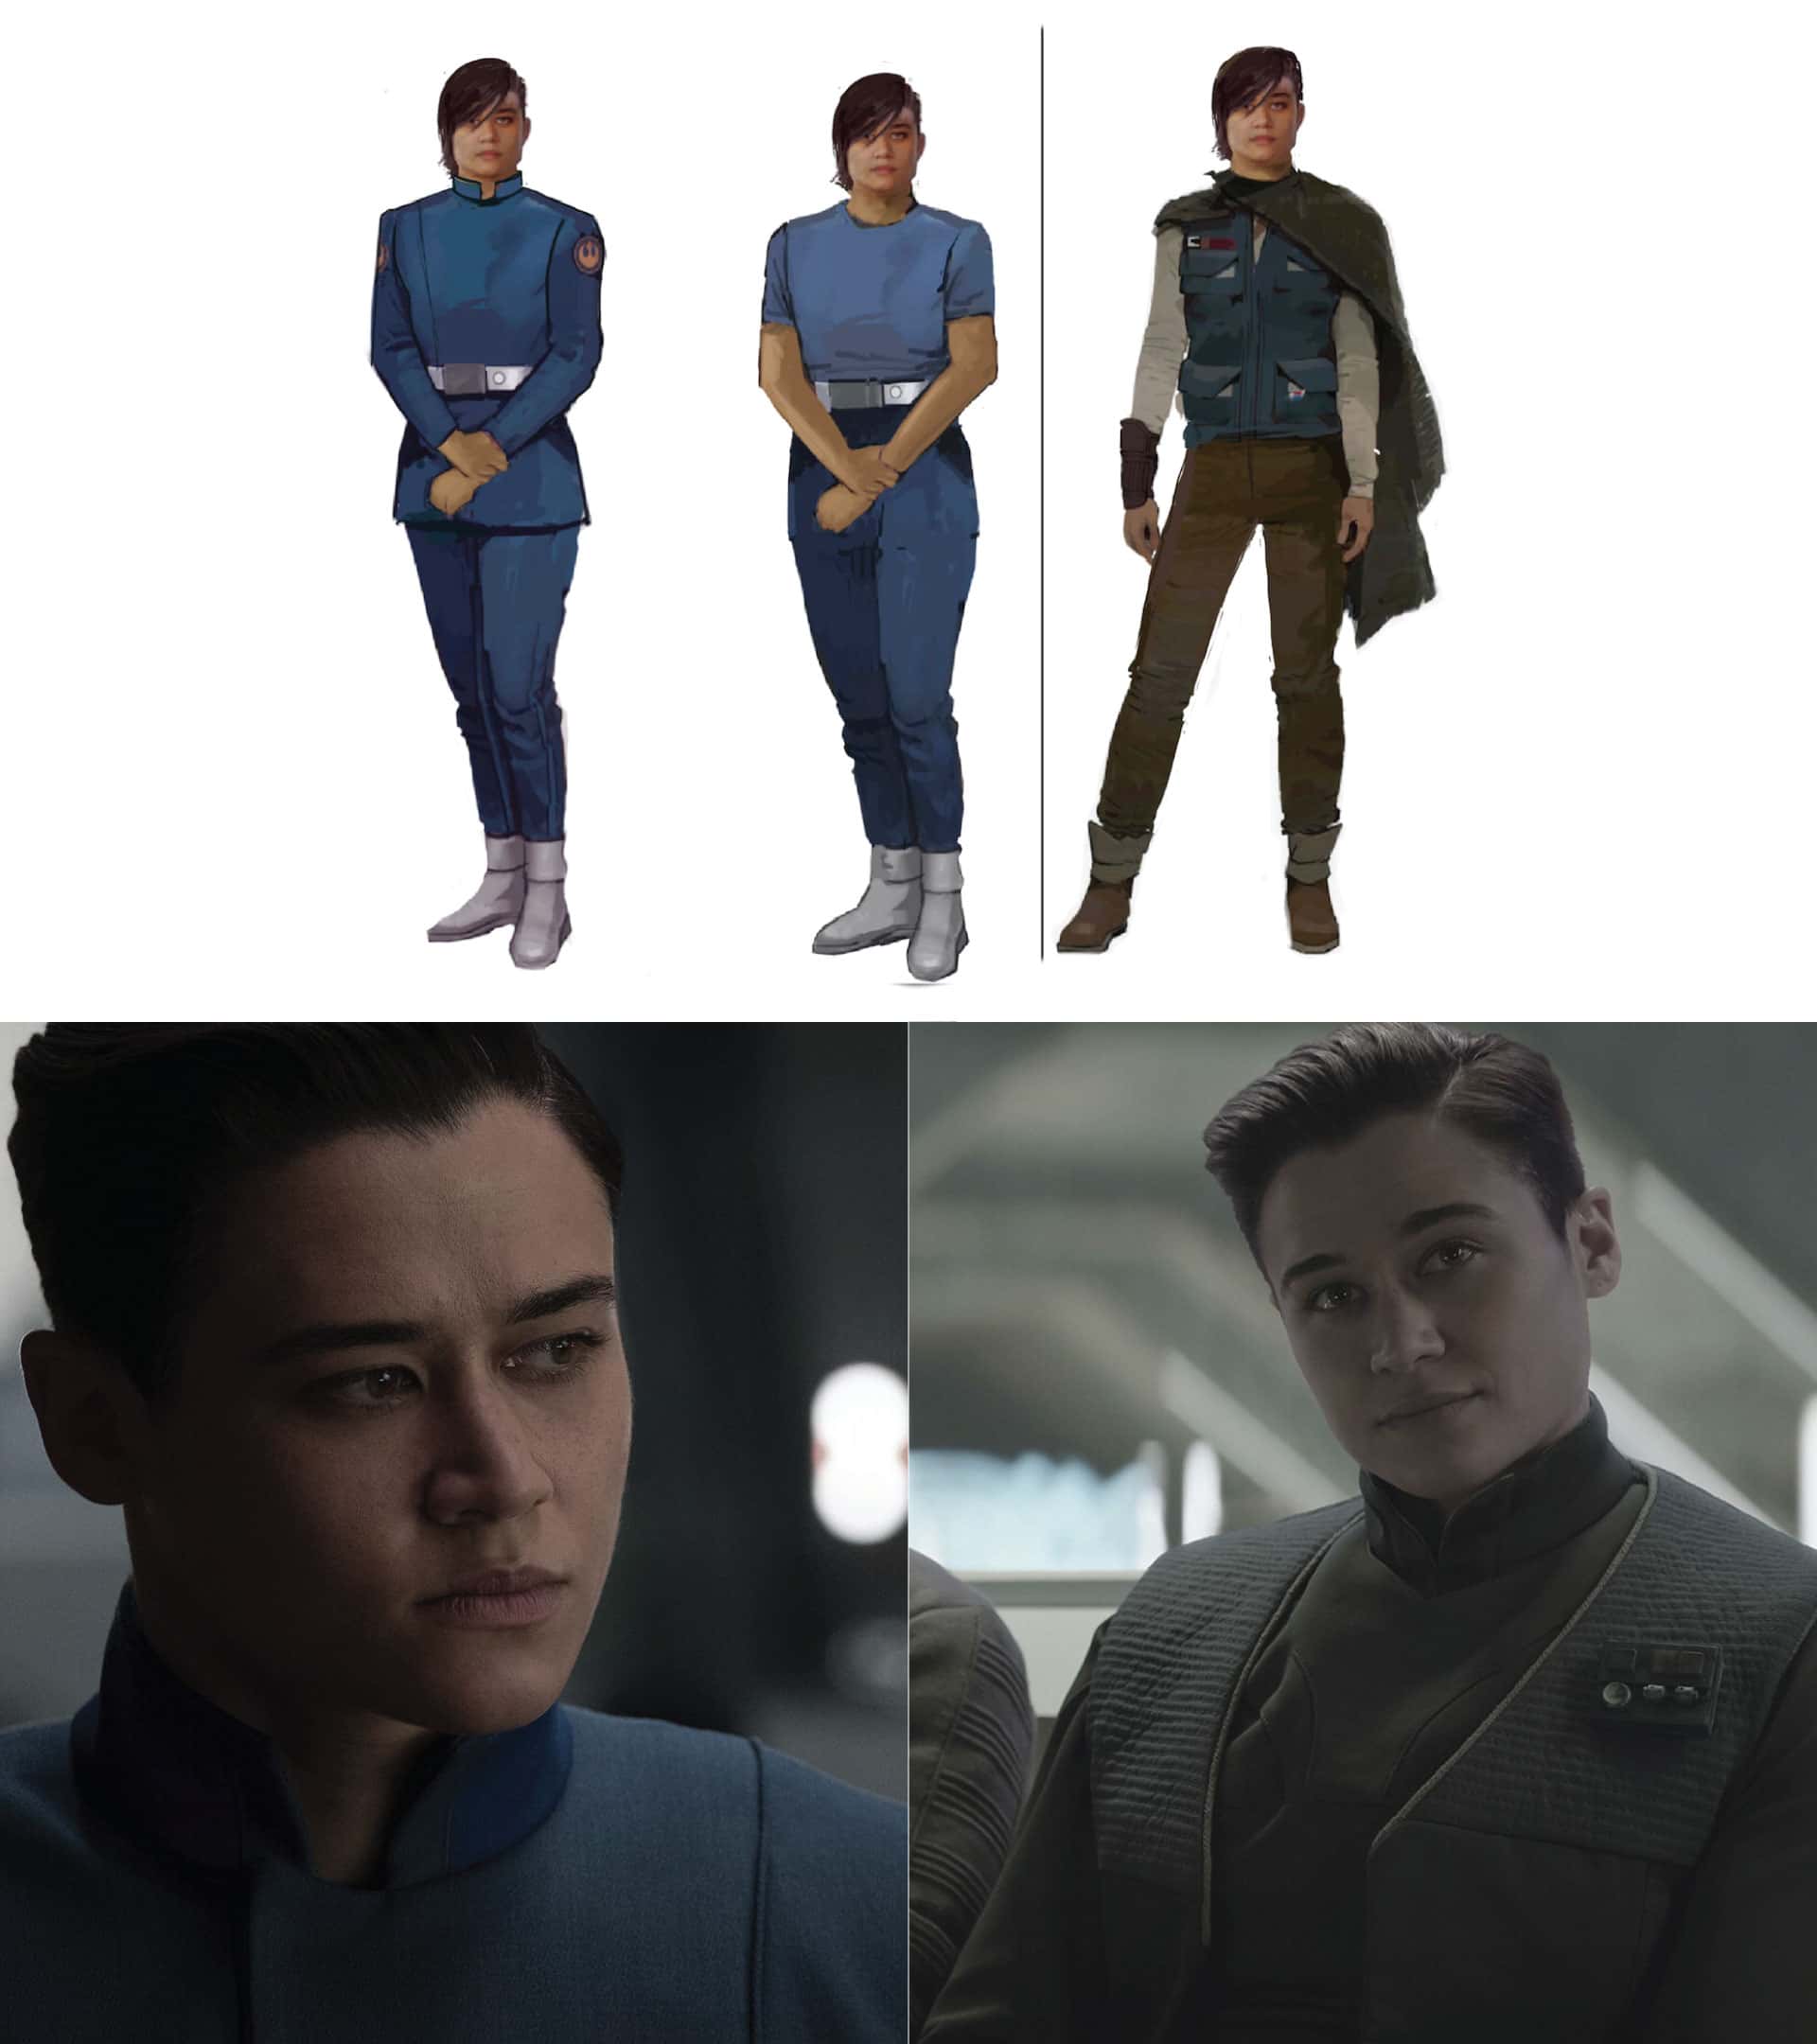 Elia Kane, from concept art to screen showing her New Republic Amnesty Program uniform and her secret outing wardrobe change. Concept art by Brian Matyas, Imario Susilo, and Shawna Trpcic - Lucasfilm Ltd.